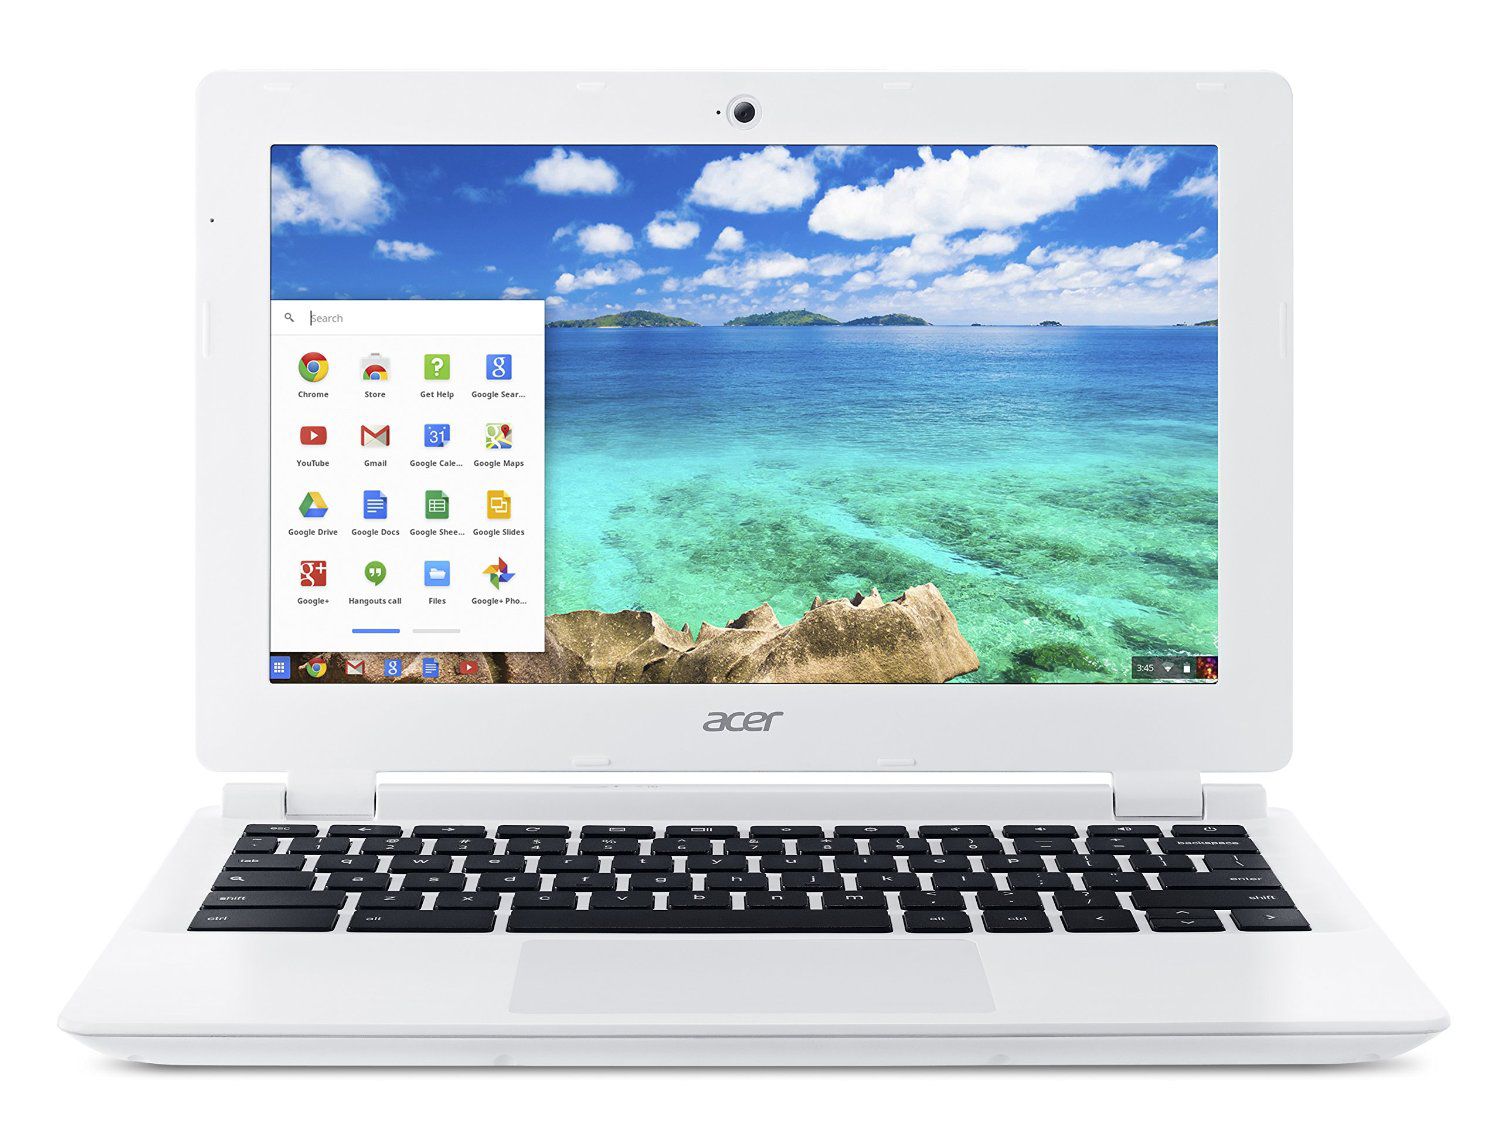 Chromebook 90 basically new paid 200 for it